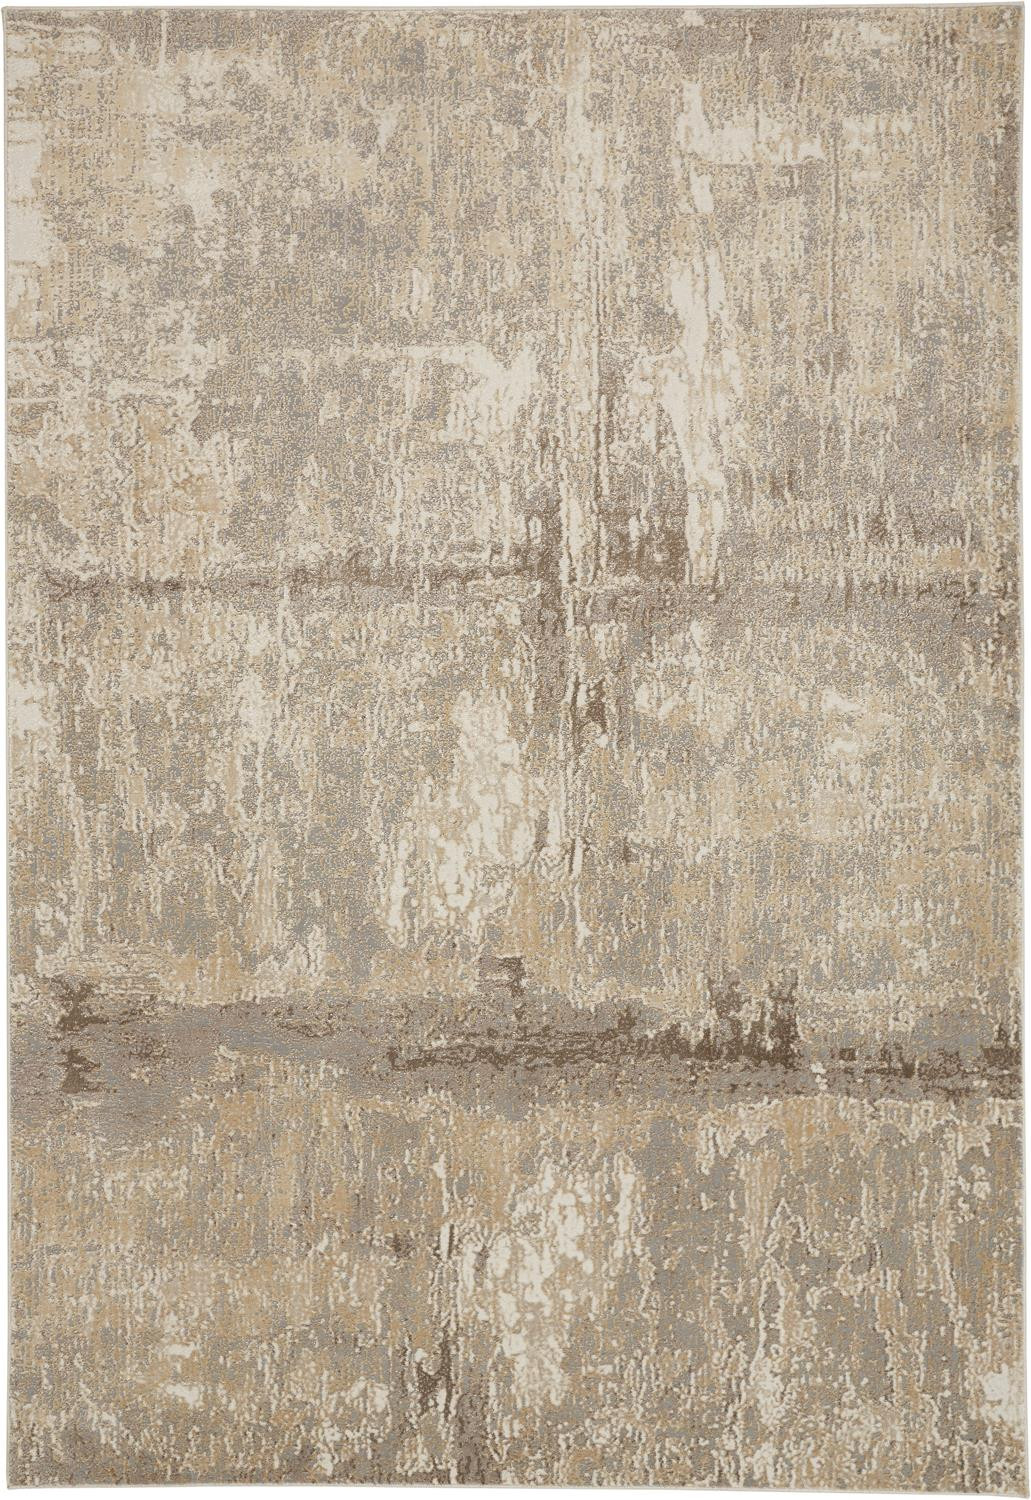 5' X 8' Tan Ivory And Brown Abstract Area Rug-514688-1